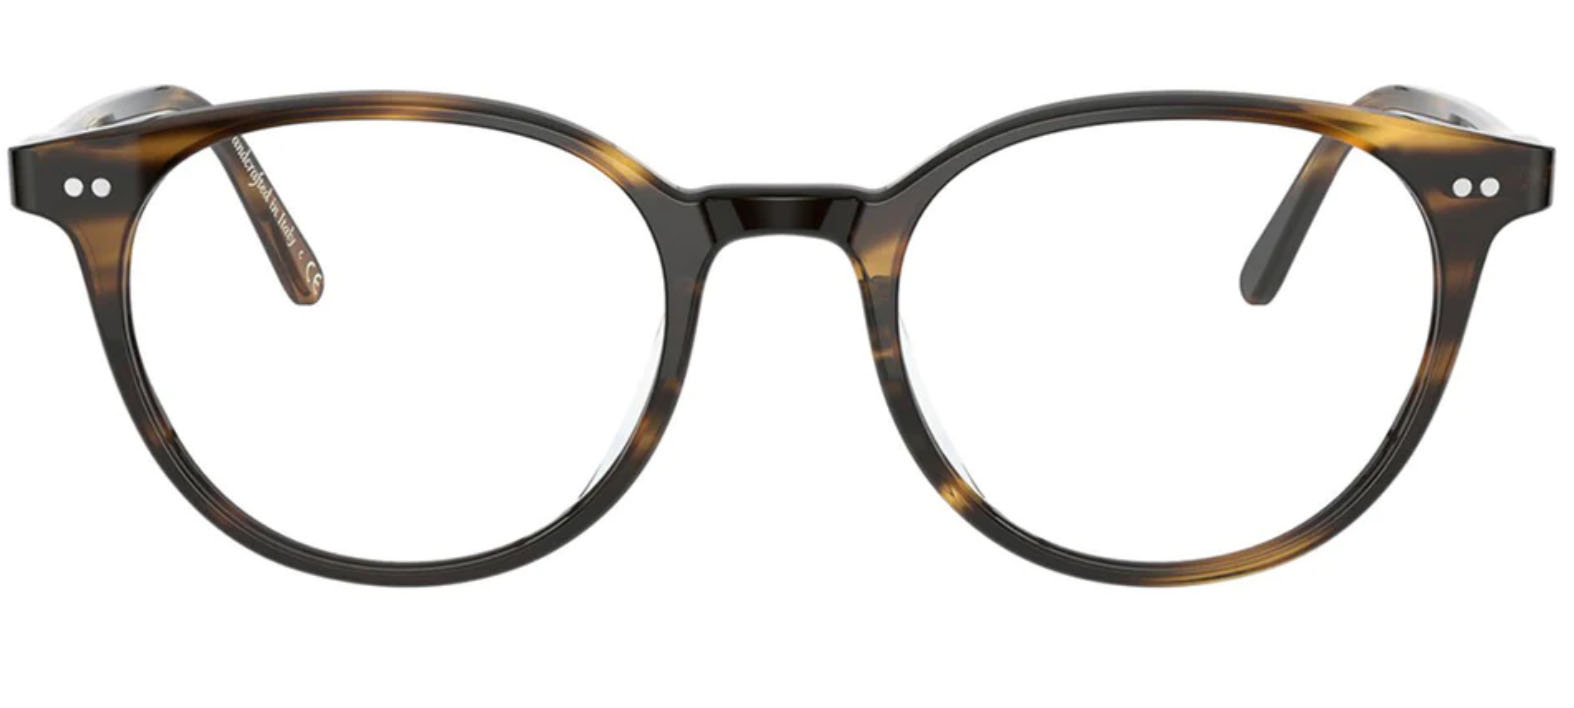 Oliver Peoples Mickett Glasses